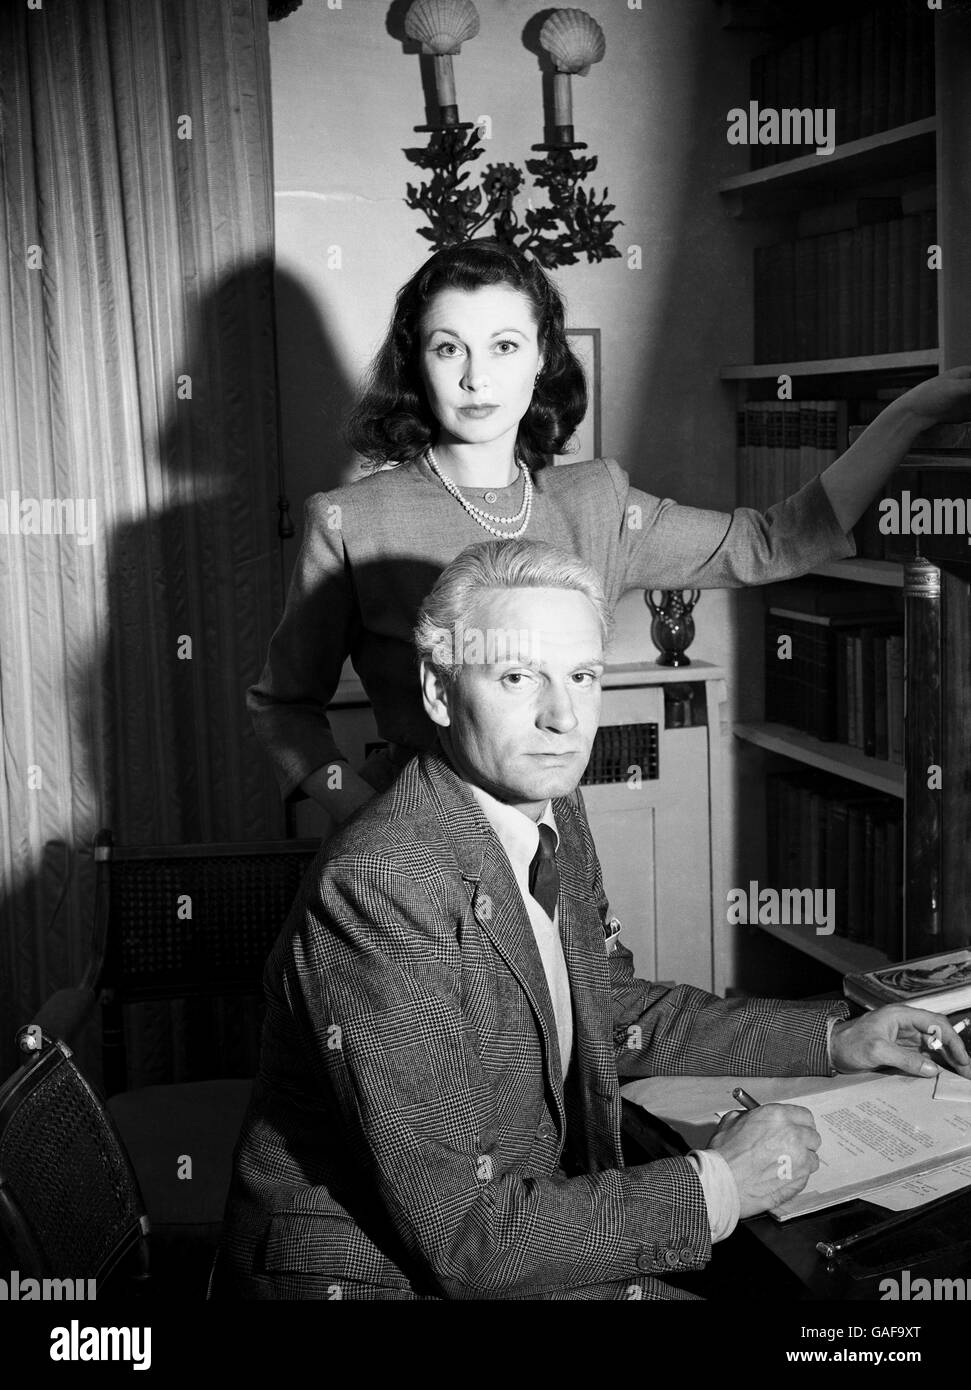 UK Entertainment - Film - Laurence Olivier and Vivien Leigh - London - 1947. British Actor Laurence Olivier with his wife actress Vivien Leigh, in their London home. Stock Photo